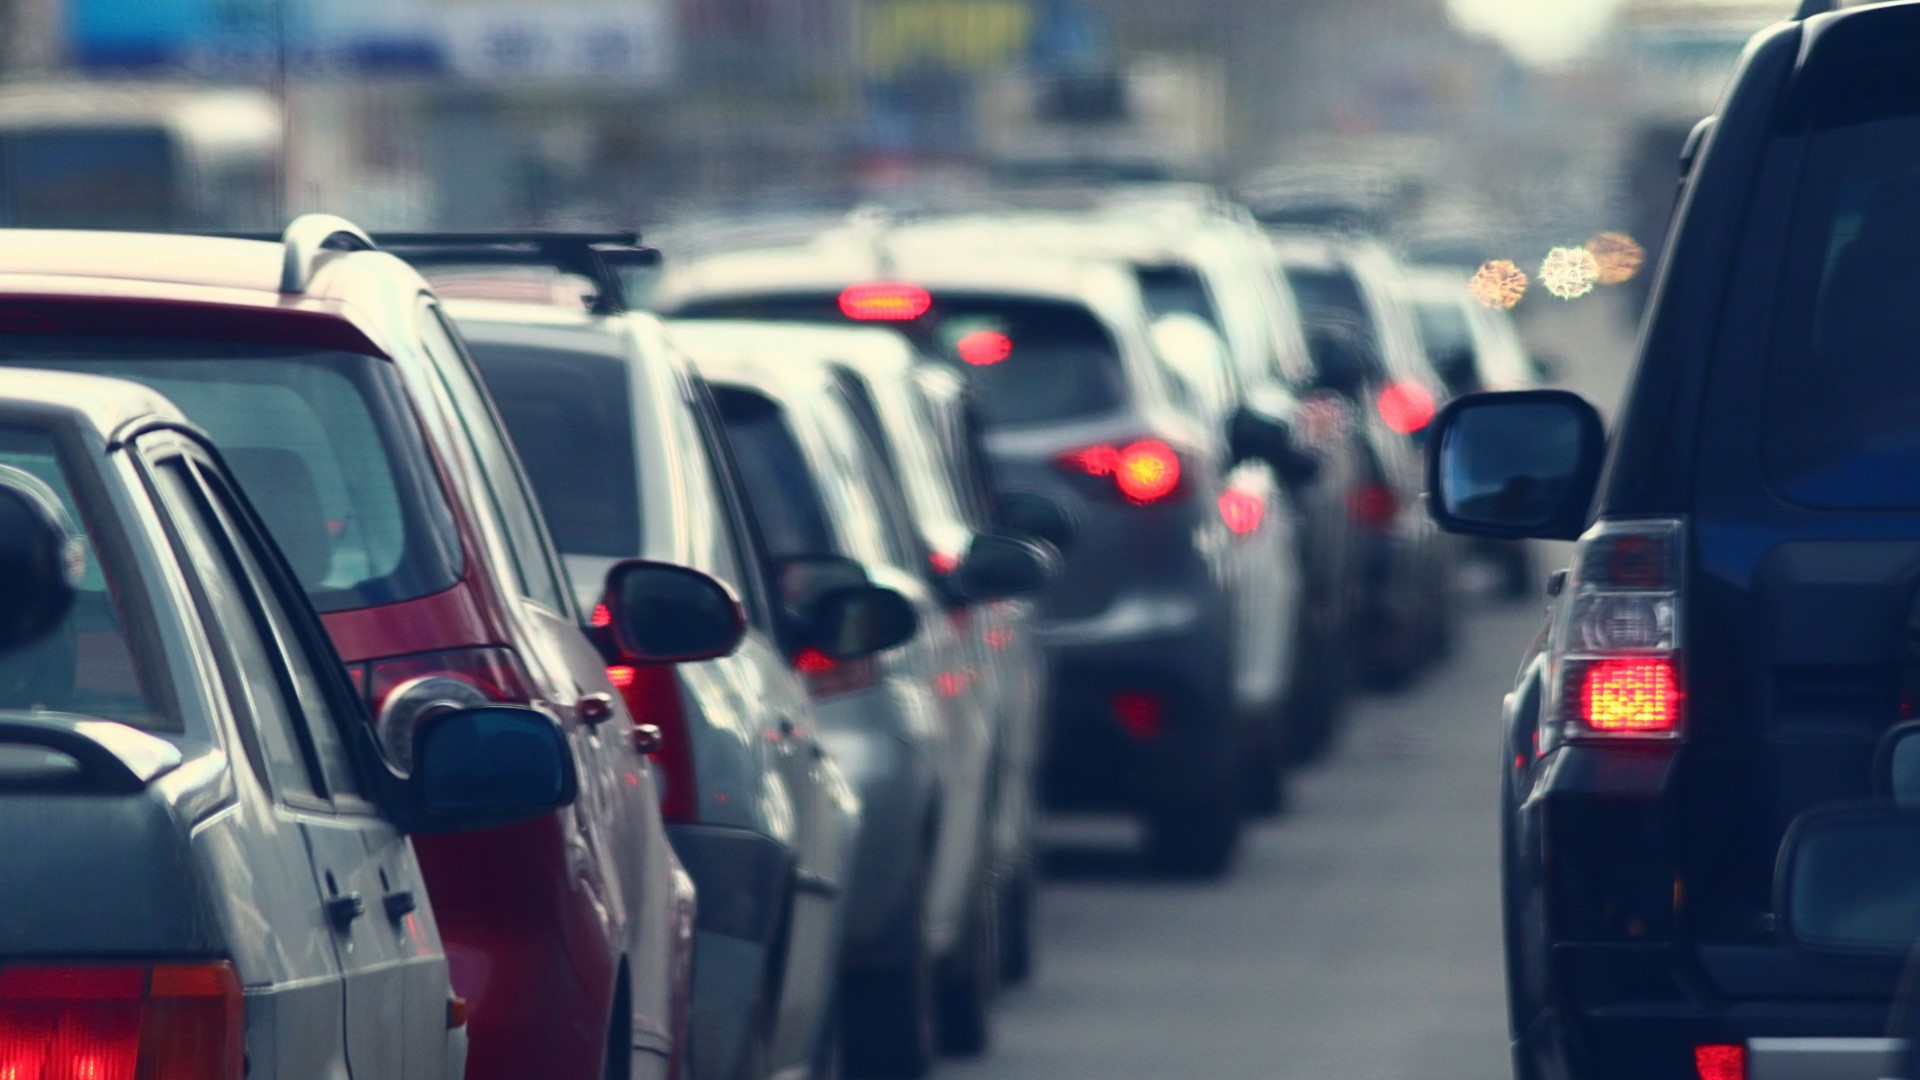 Traffic is returning as people head back to work in-person, but researchers are seeing a difference.